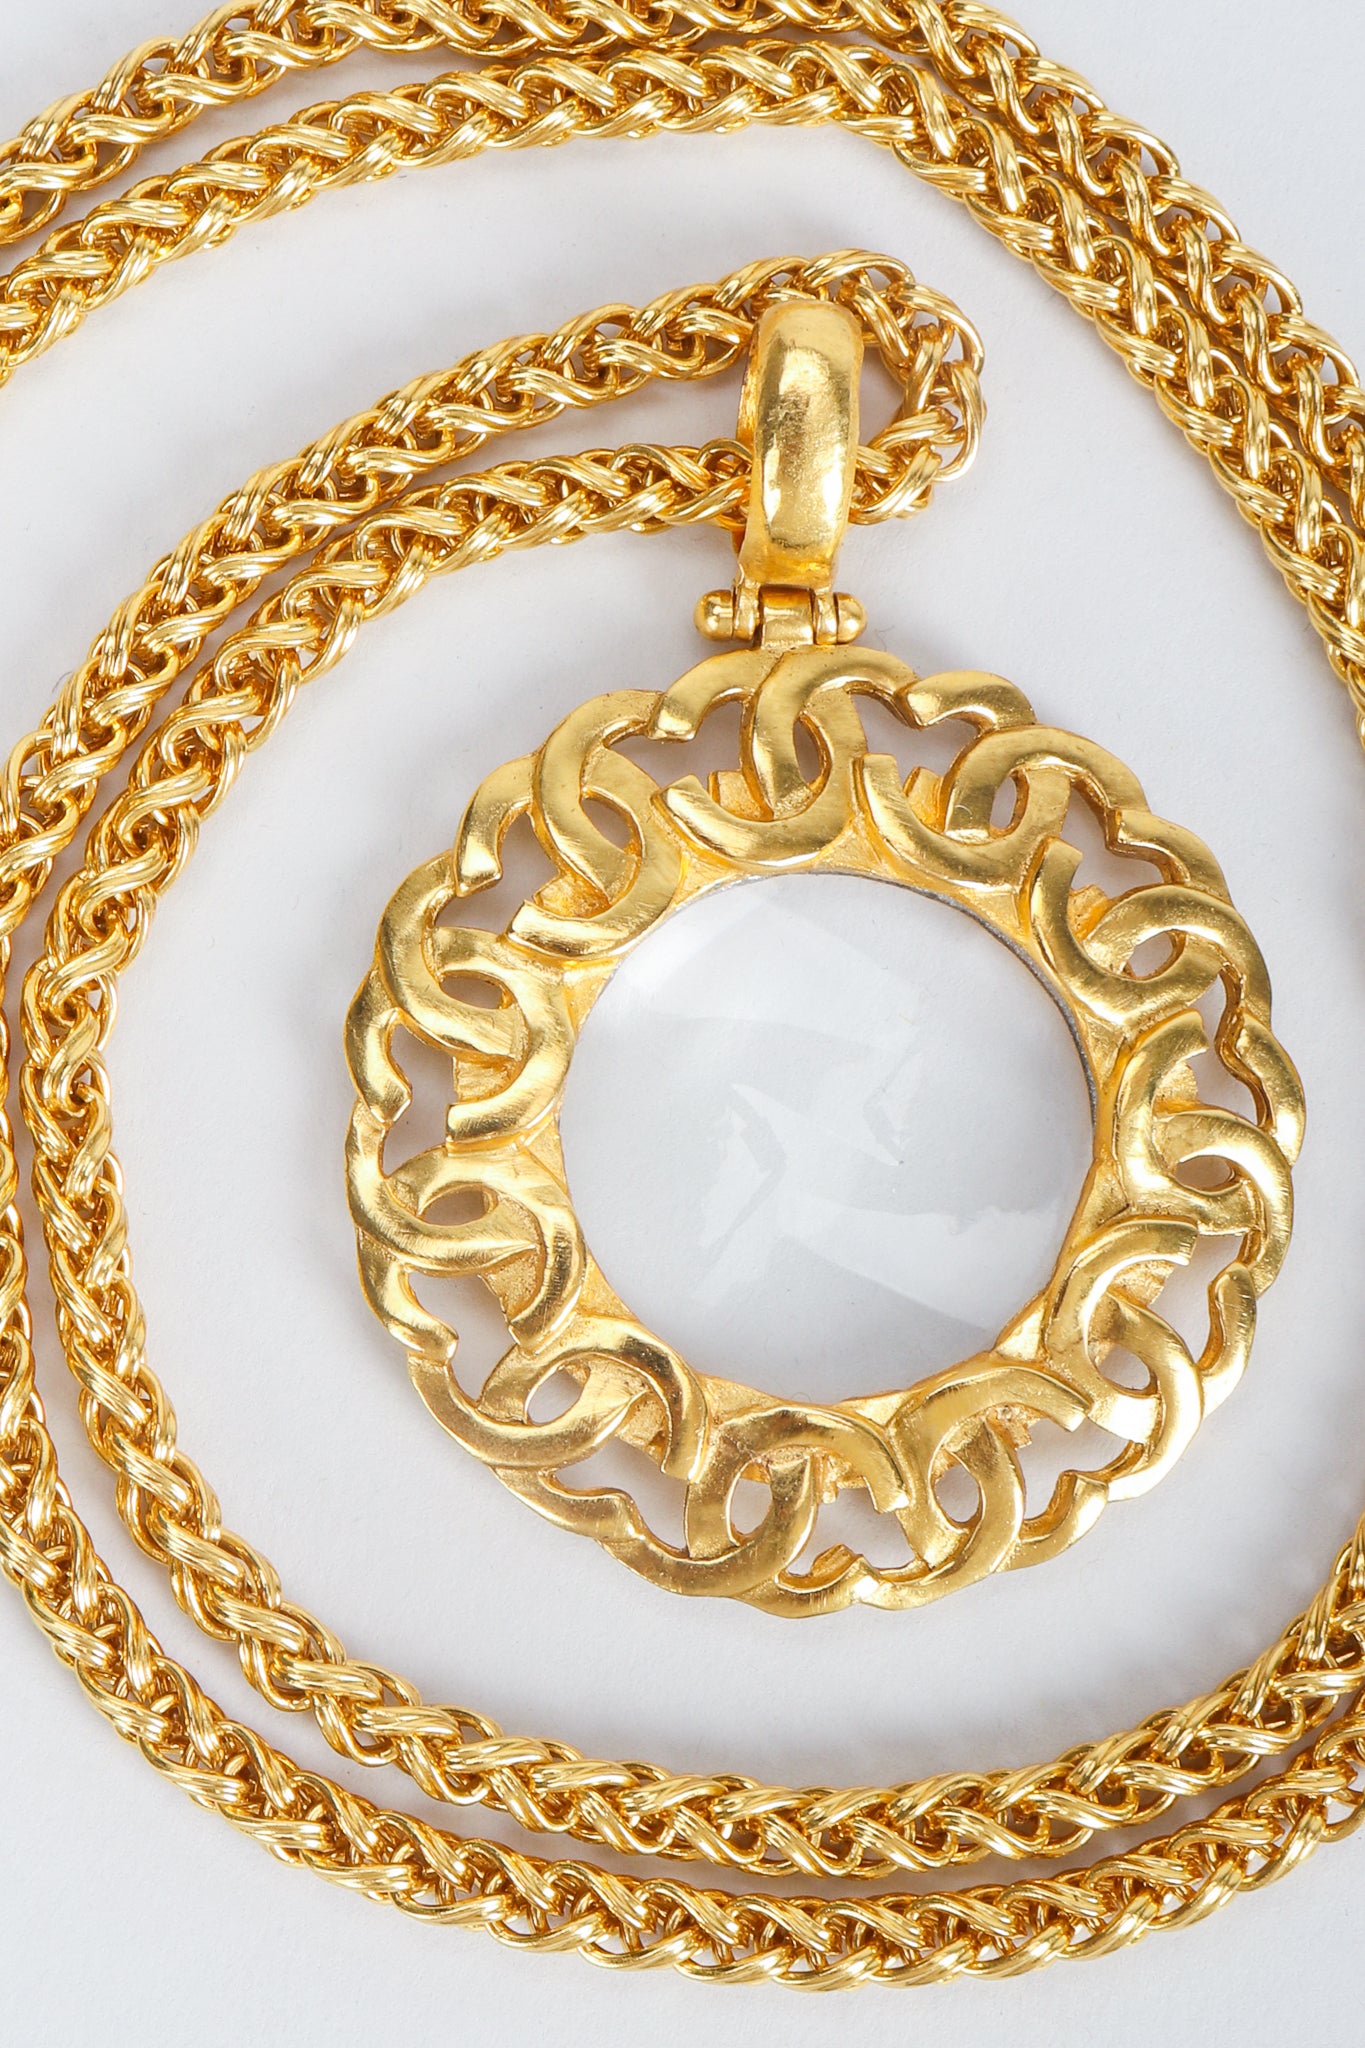 Vintage Chanel Gold CC Logo Magnifying Glass Pendant Necklace Swirl